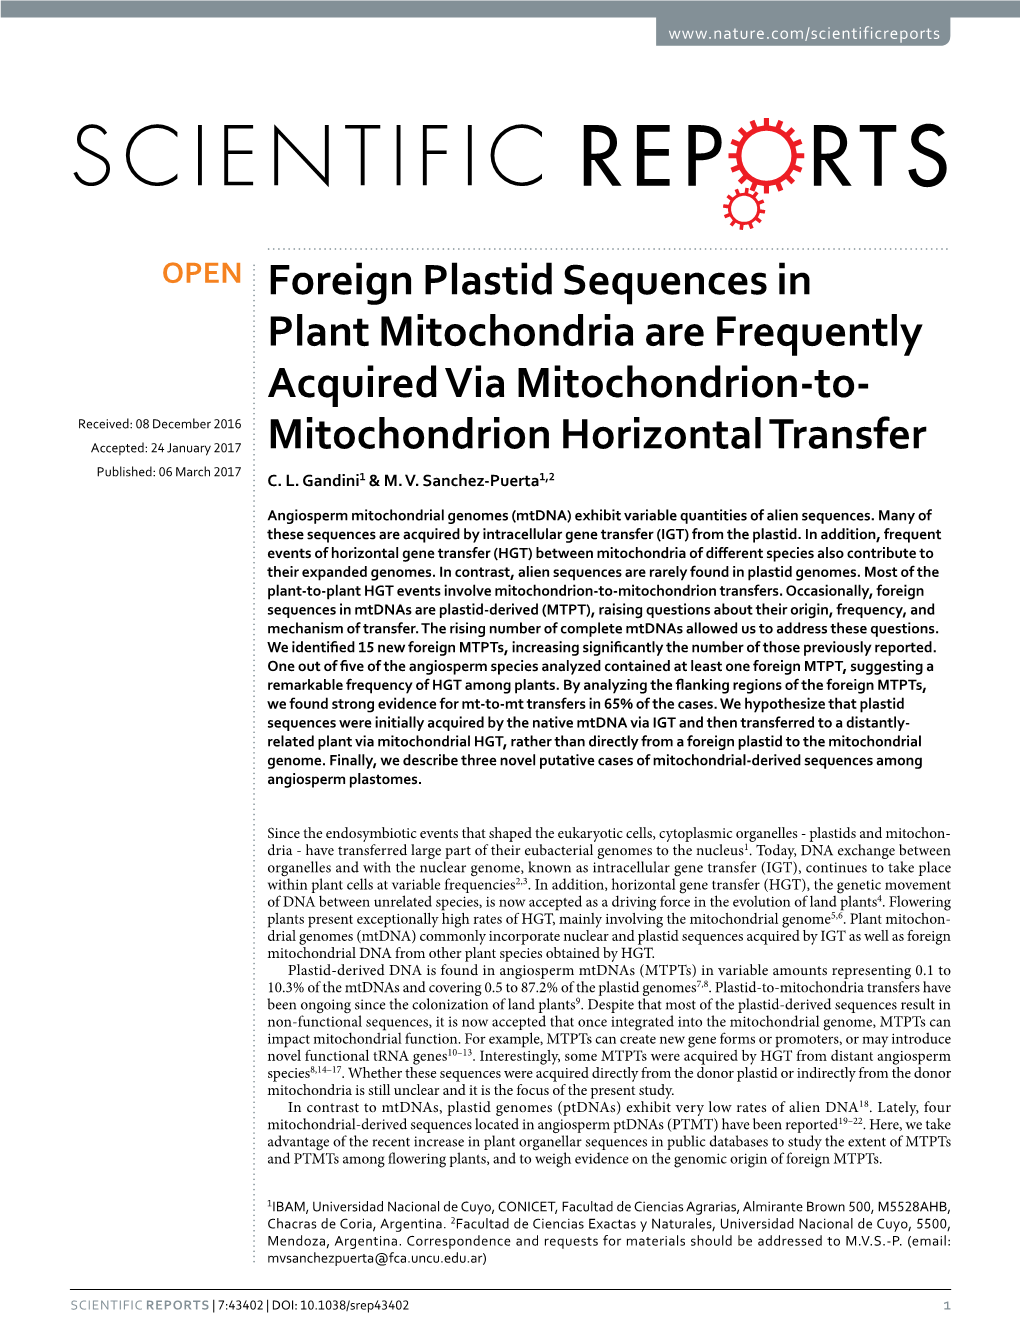 Foreign Plastid Sequences in Plant Mitochondria Are Frequently